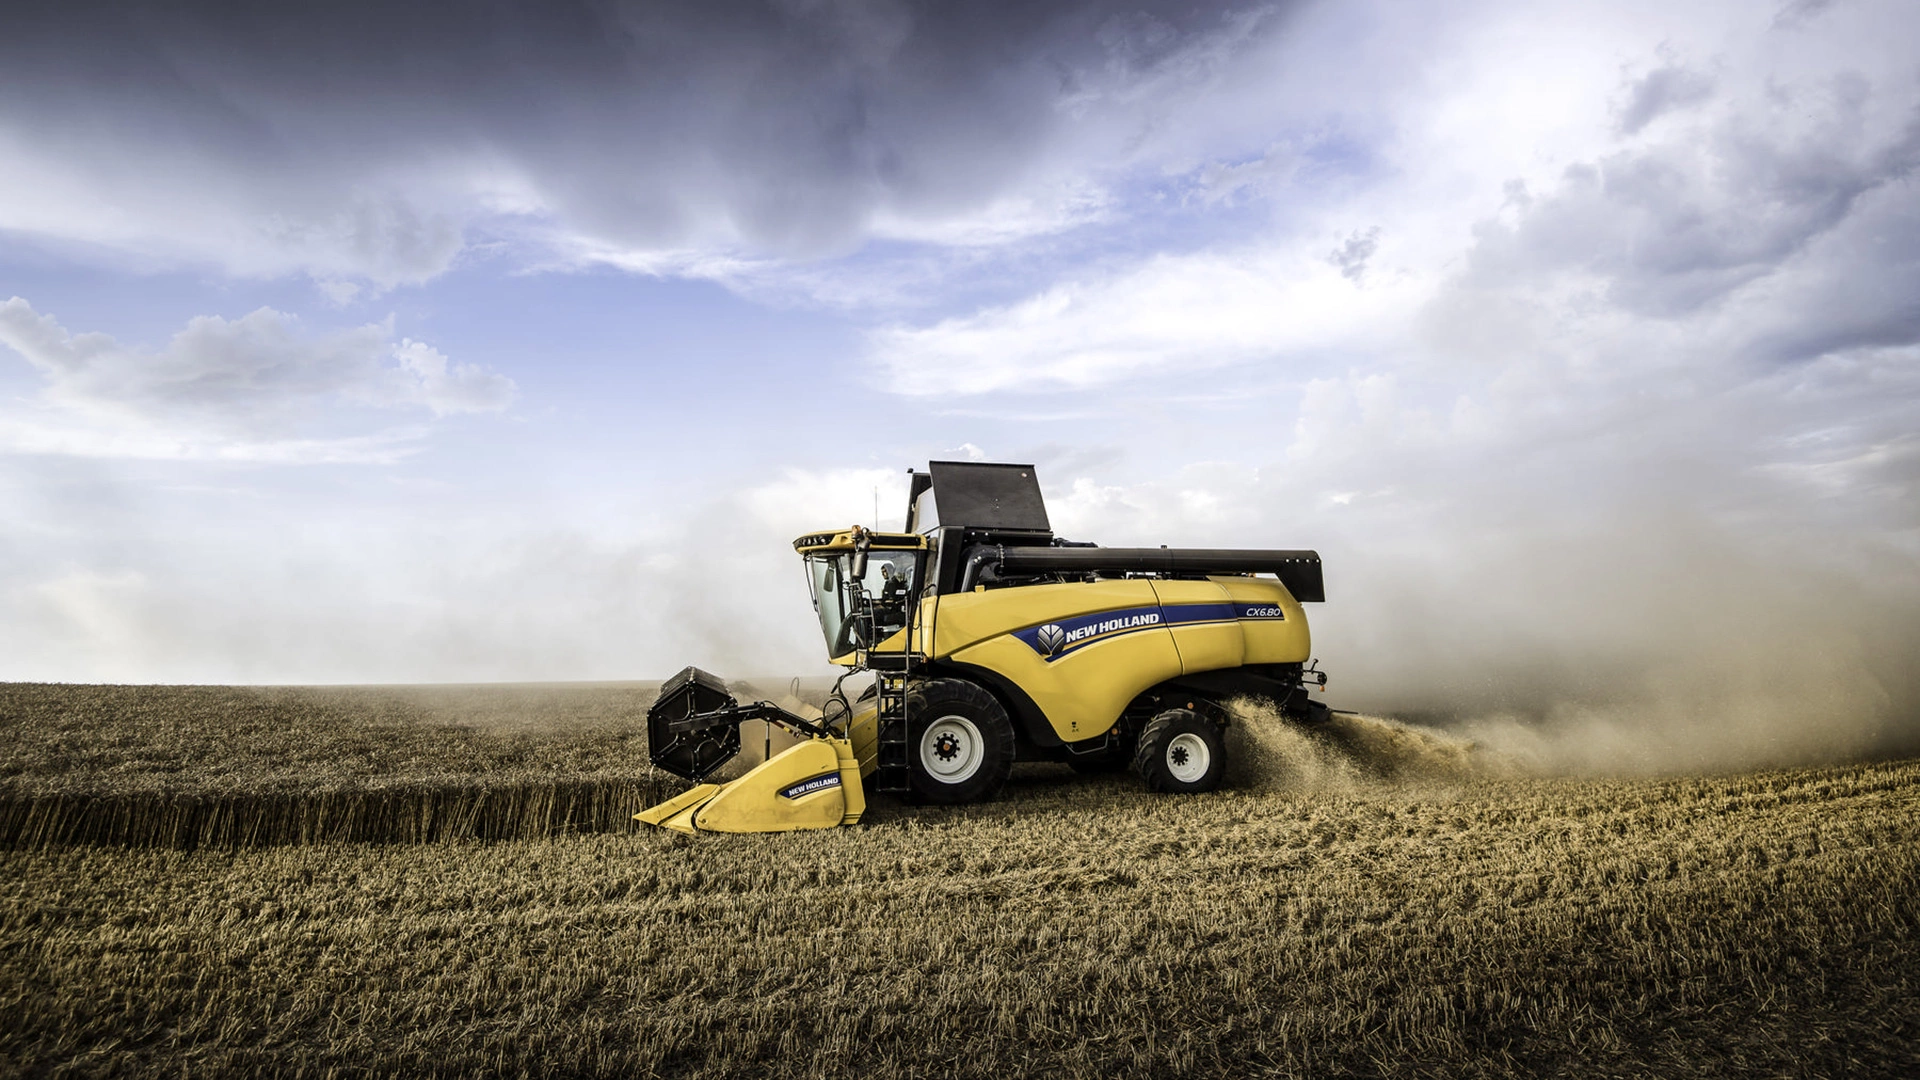 New Holland CX5-CX6 harvester cutting wheat, dust rising, golden field and cloudy sky backdrop.